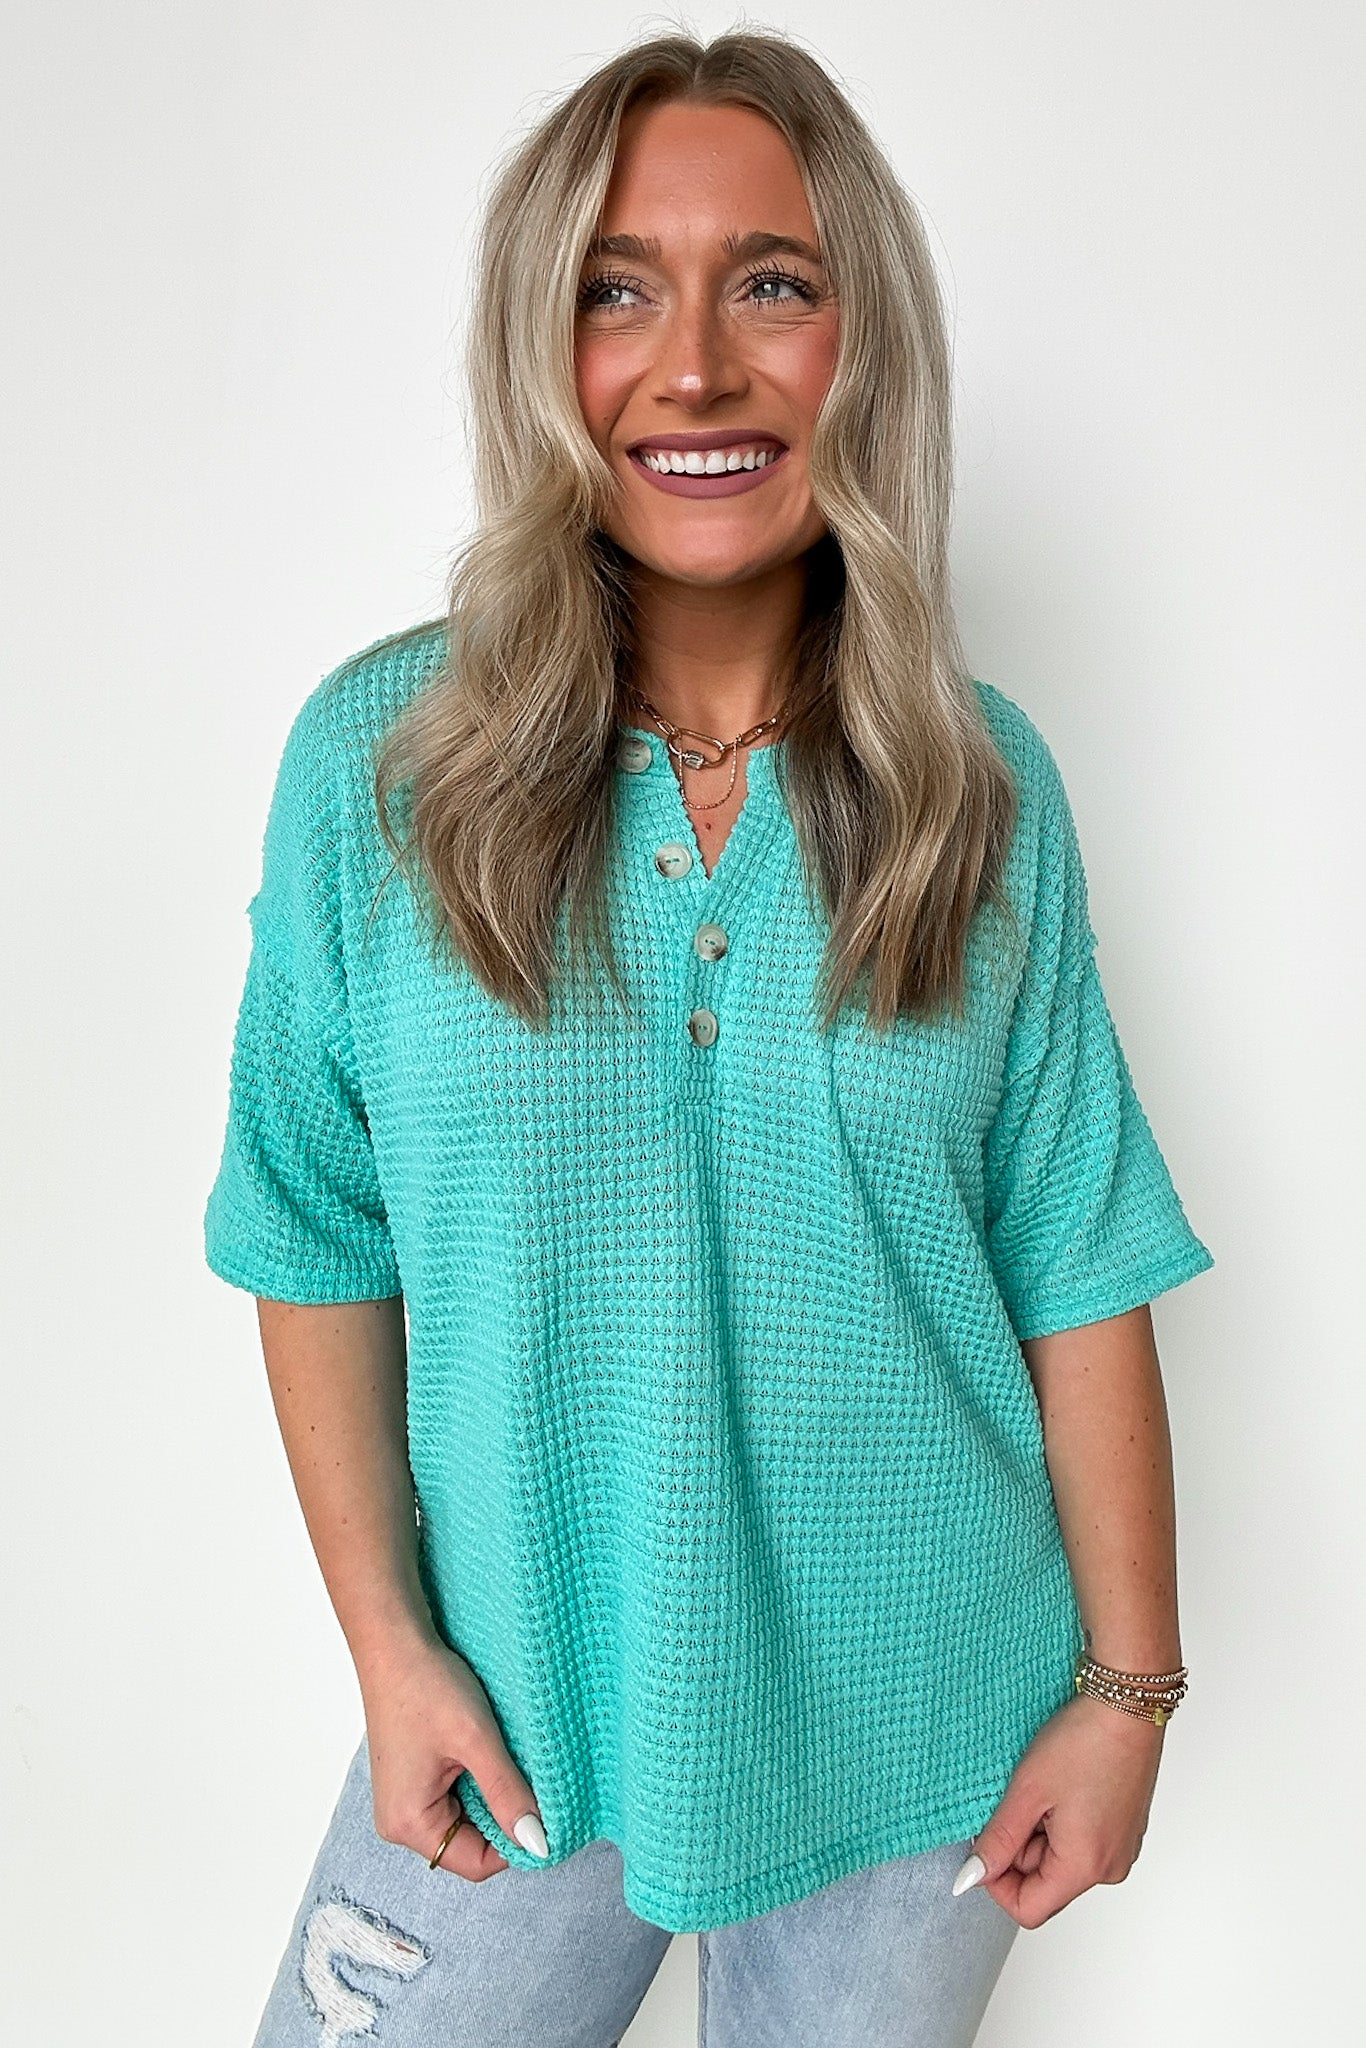 Spearmint / S Camryn V-Neck Relaxed Top - BACK IN STOCK - Madison and Mallory